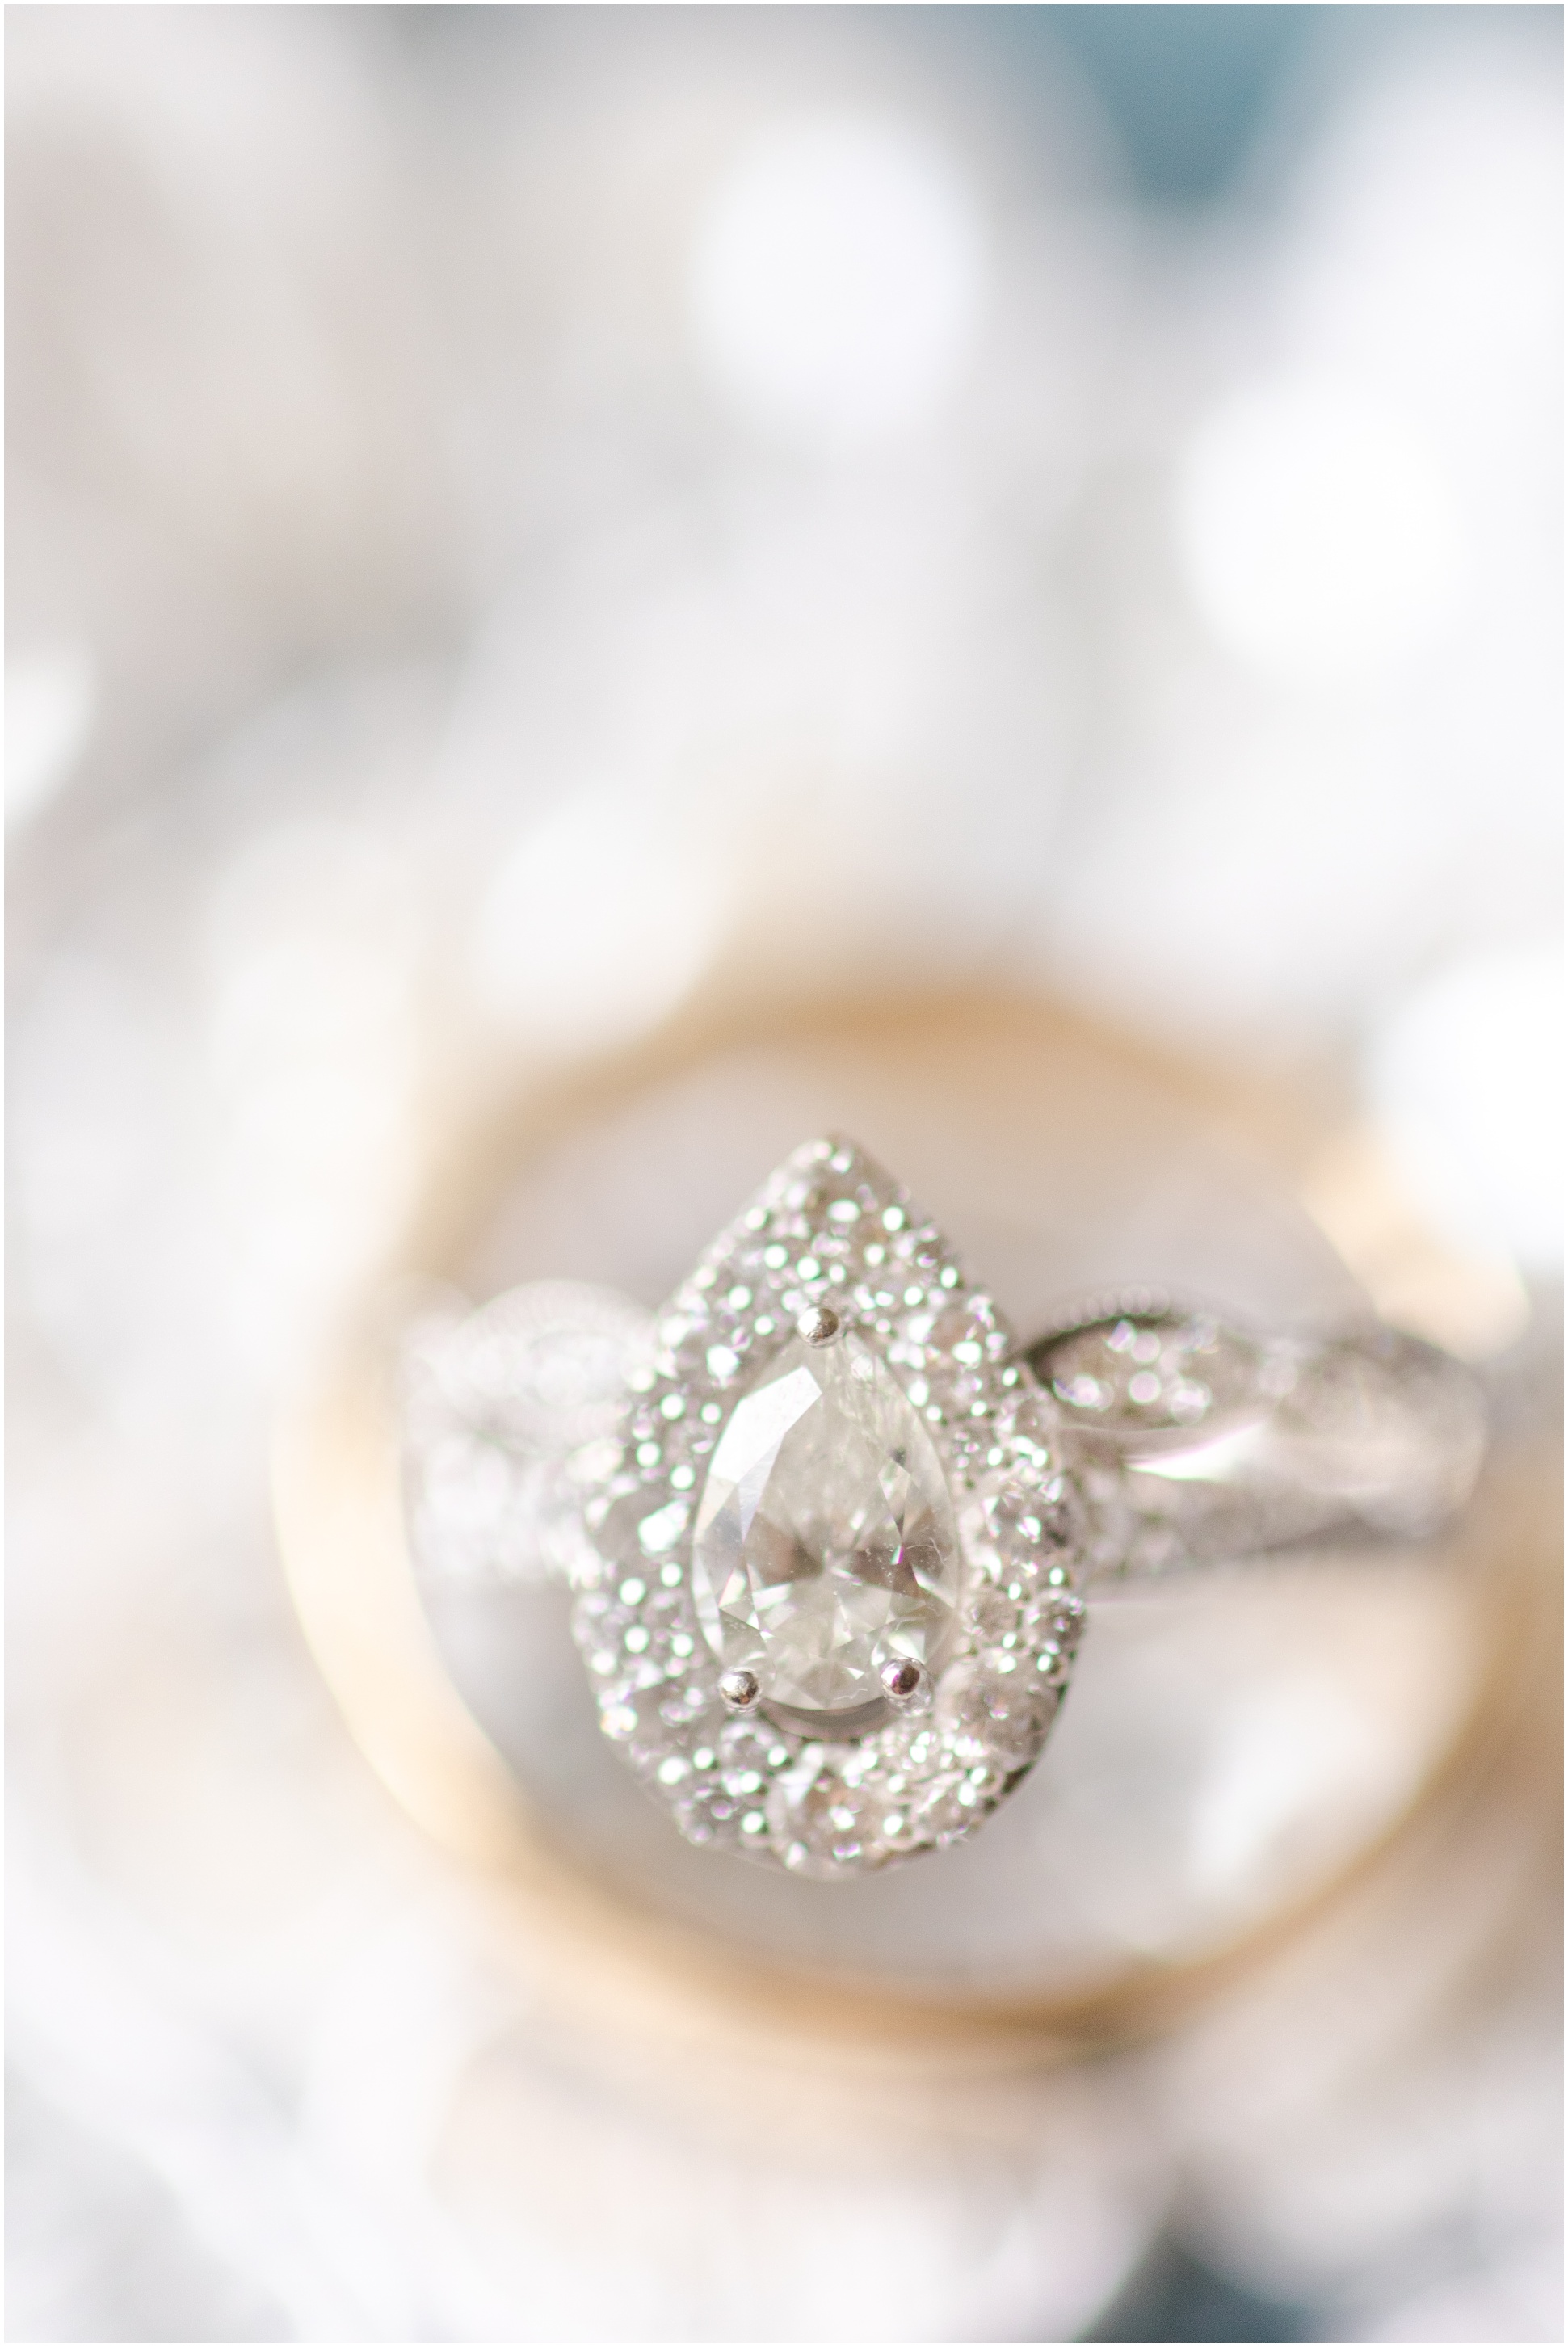 Close up of tear drop engagement ring